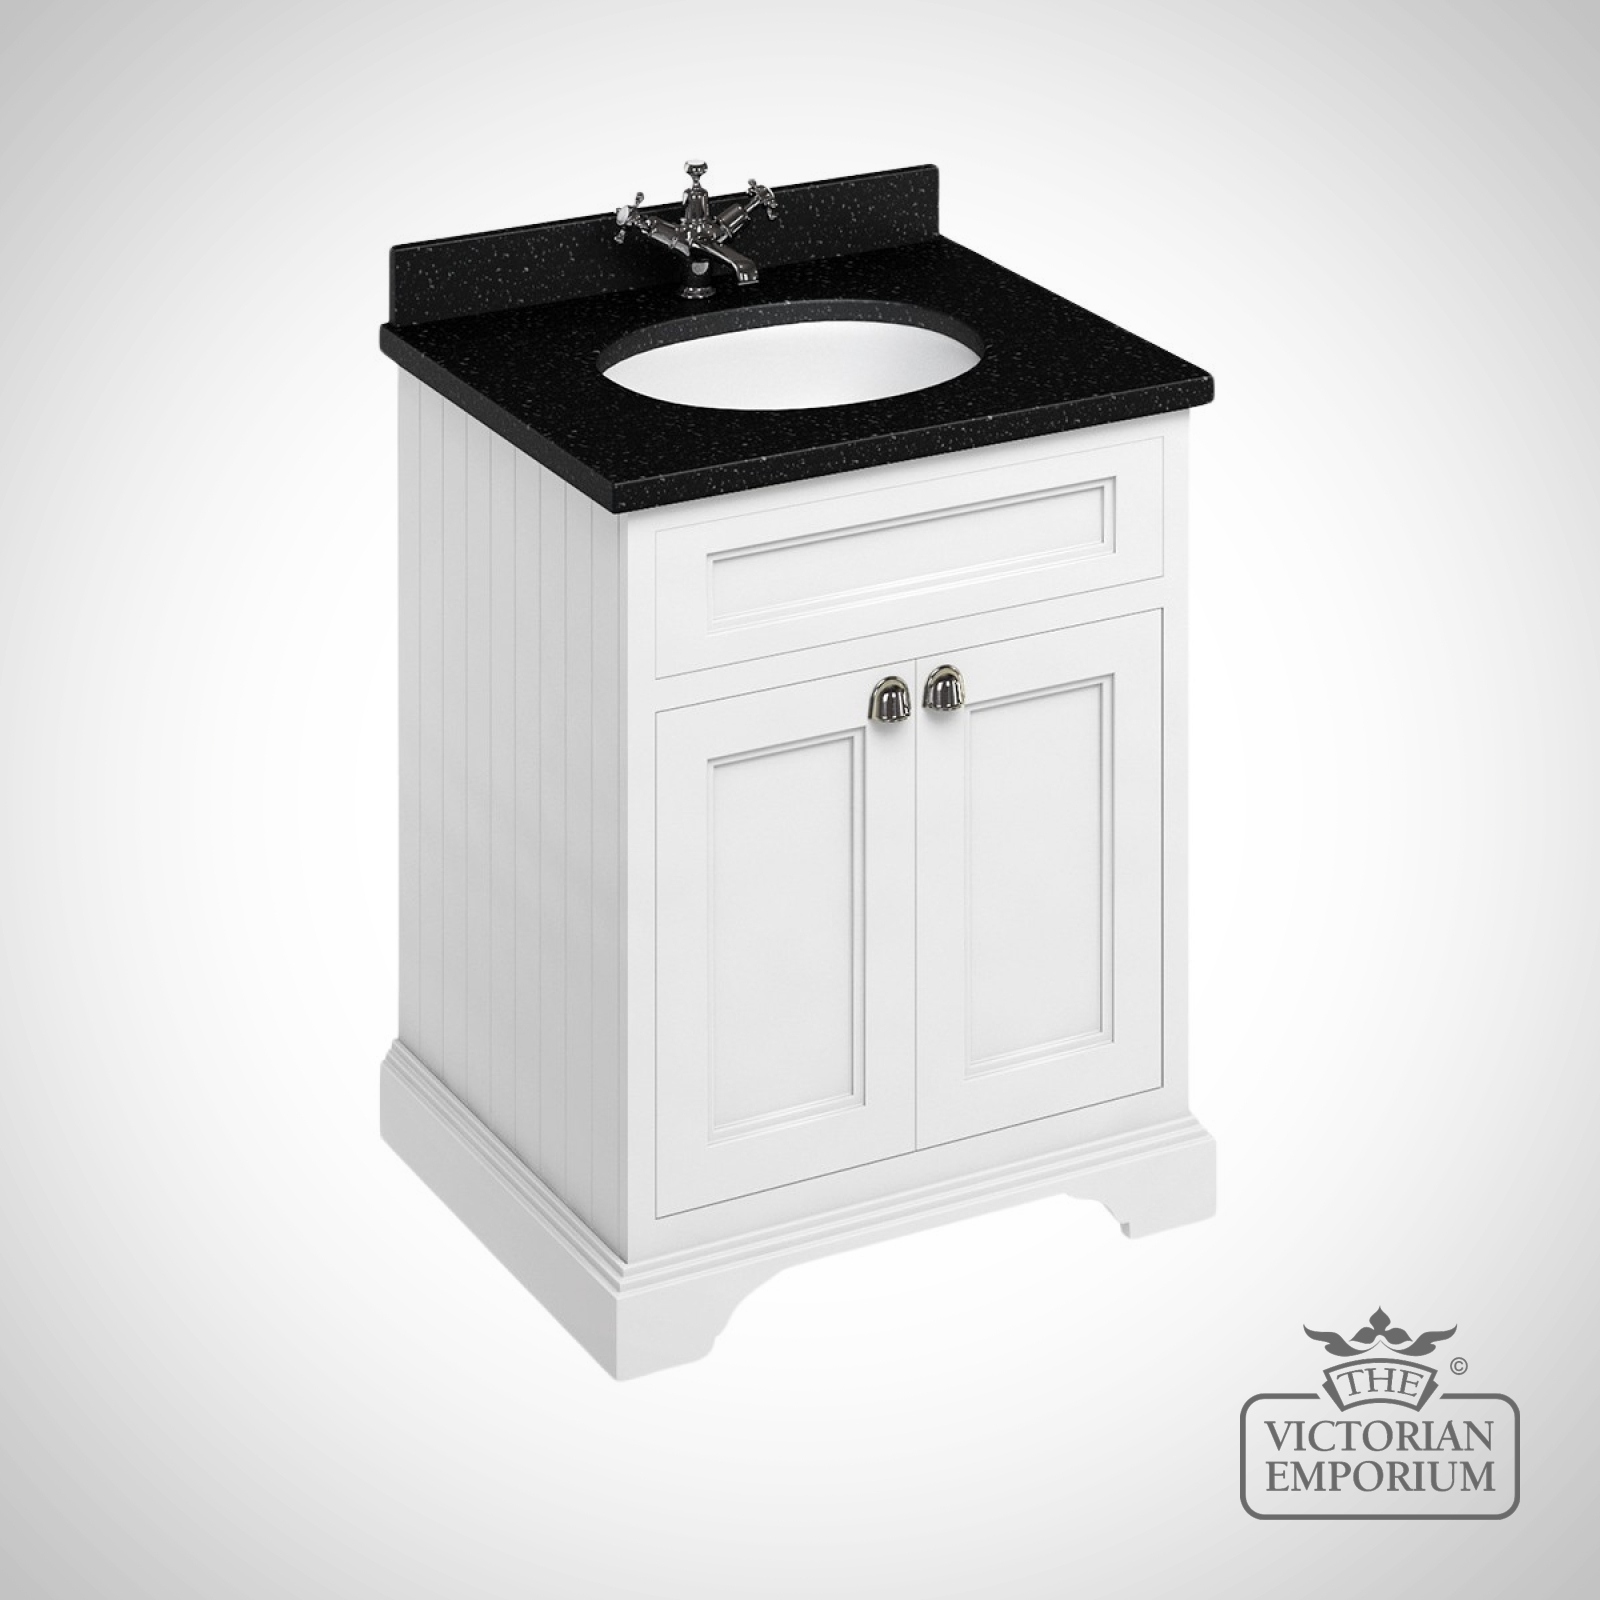 Freestanding 65cm wide Vanity Unit with worktop and inset basin